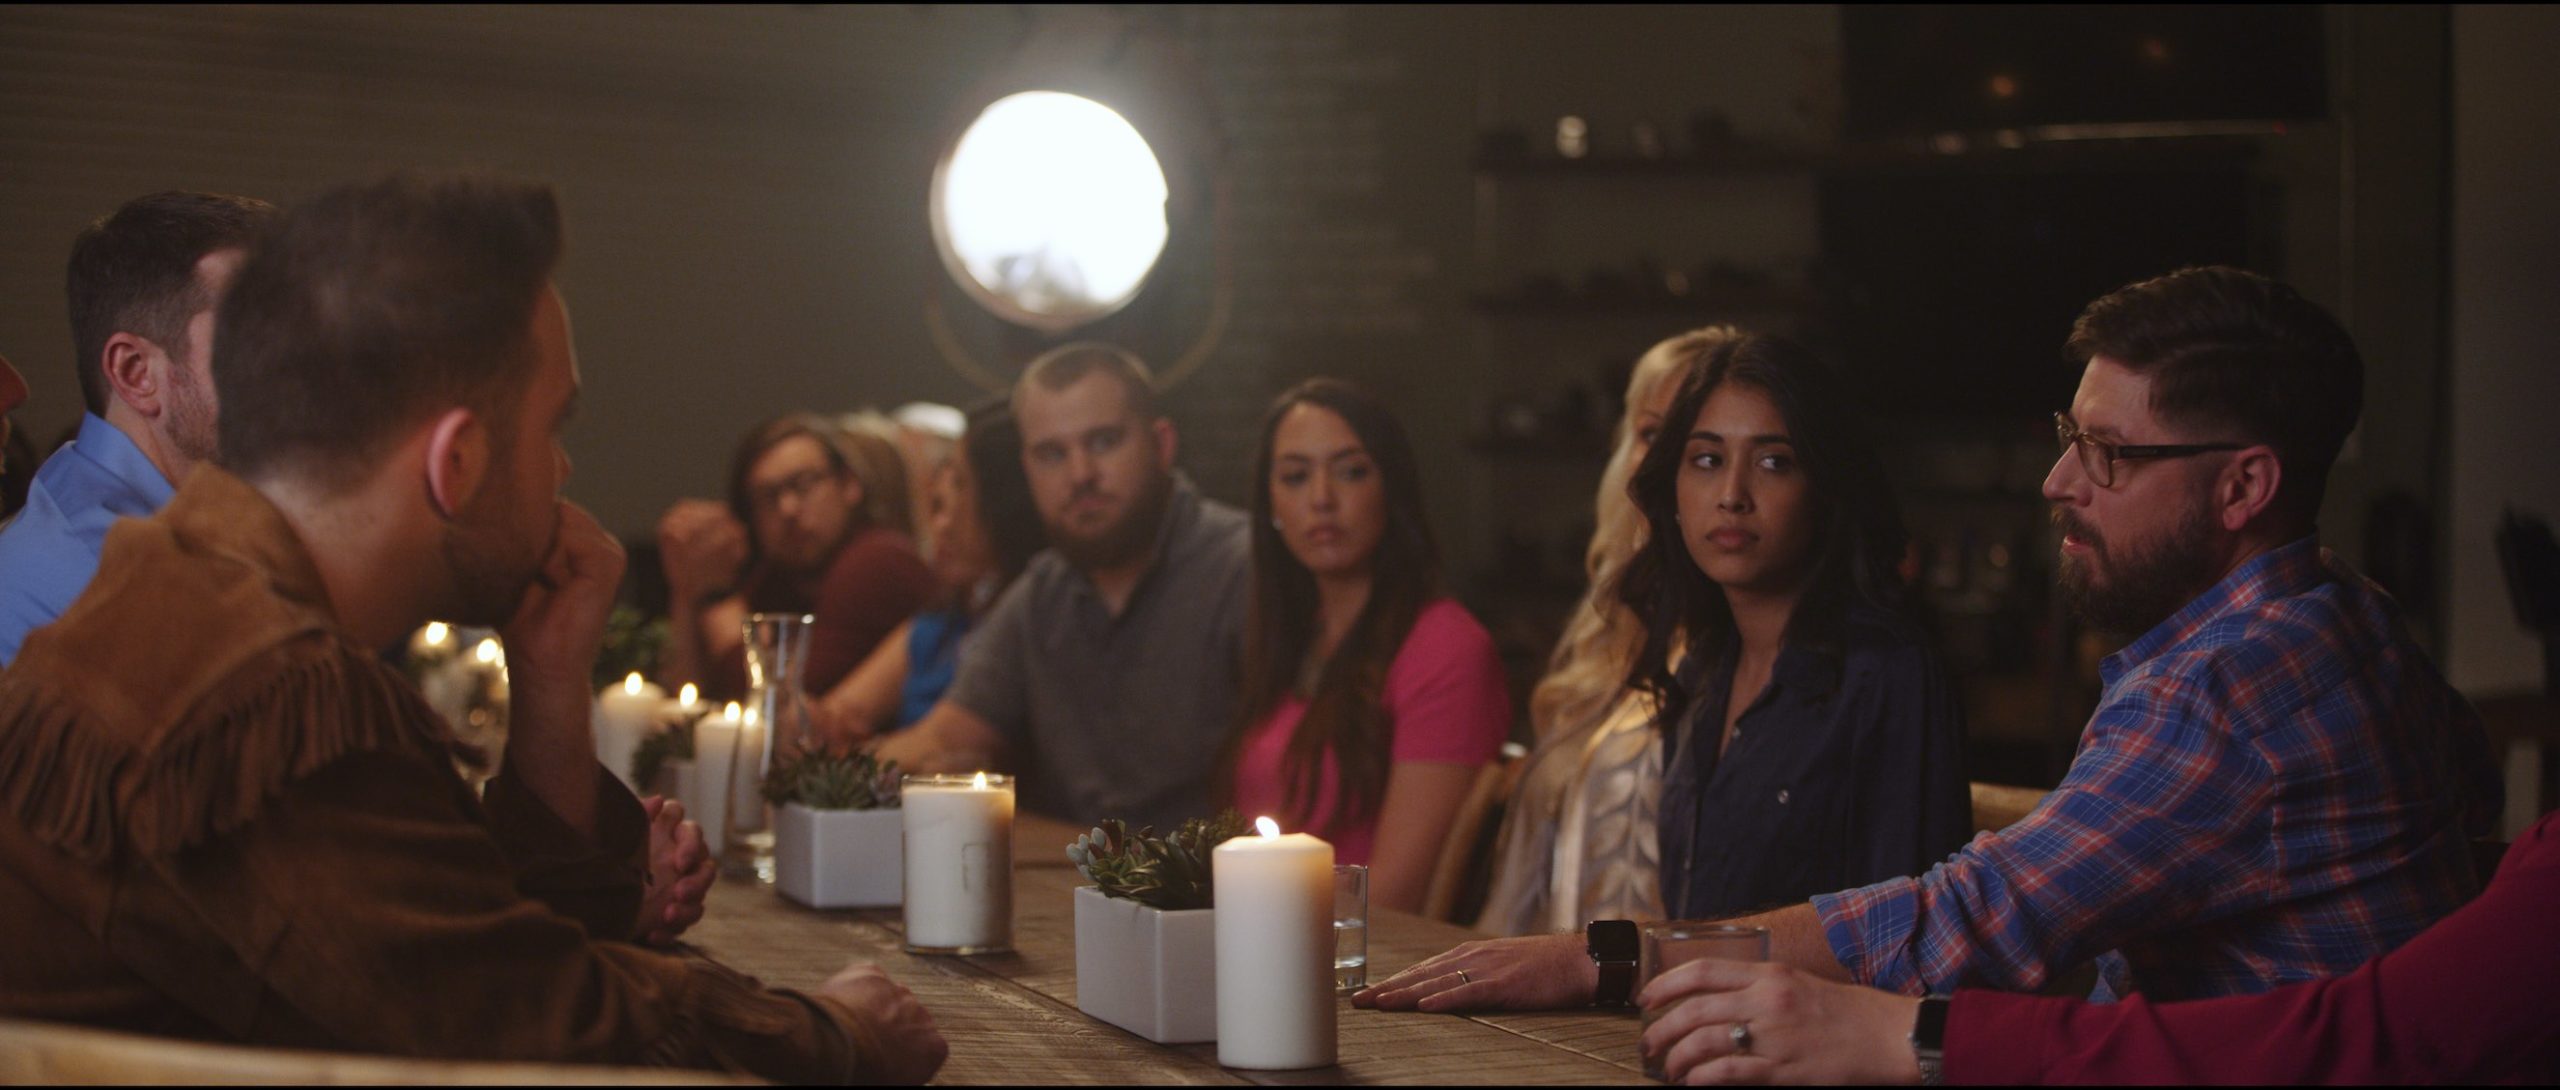 MRINetwork Company Video Lets Start Building Group of people talking at a wooden table with white candles and planters